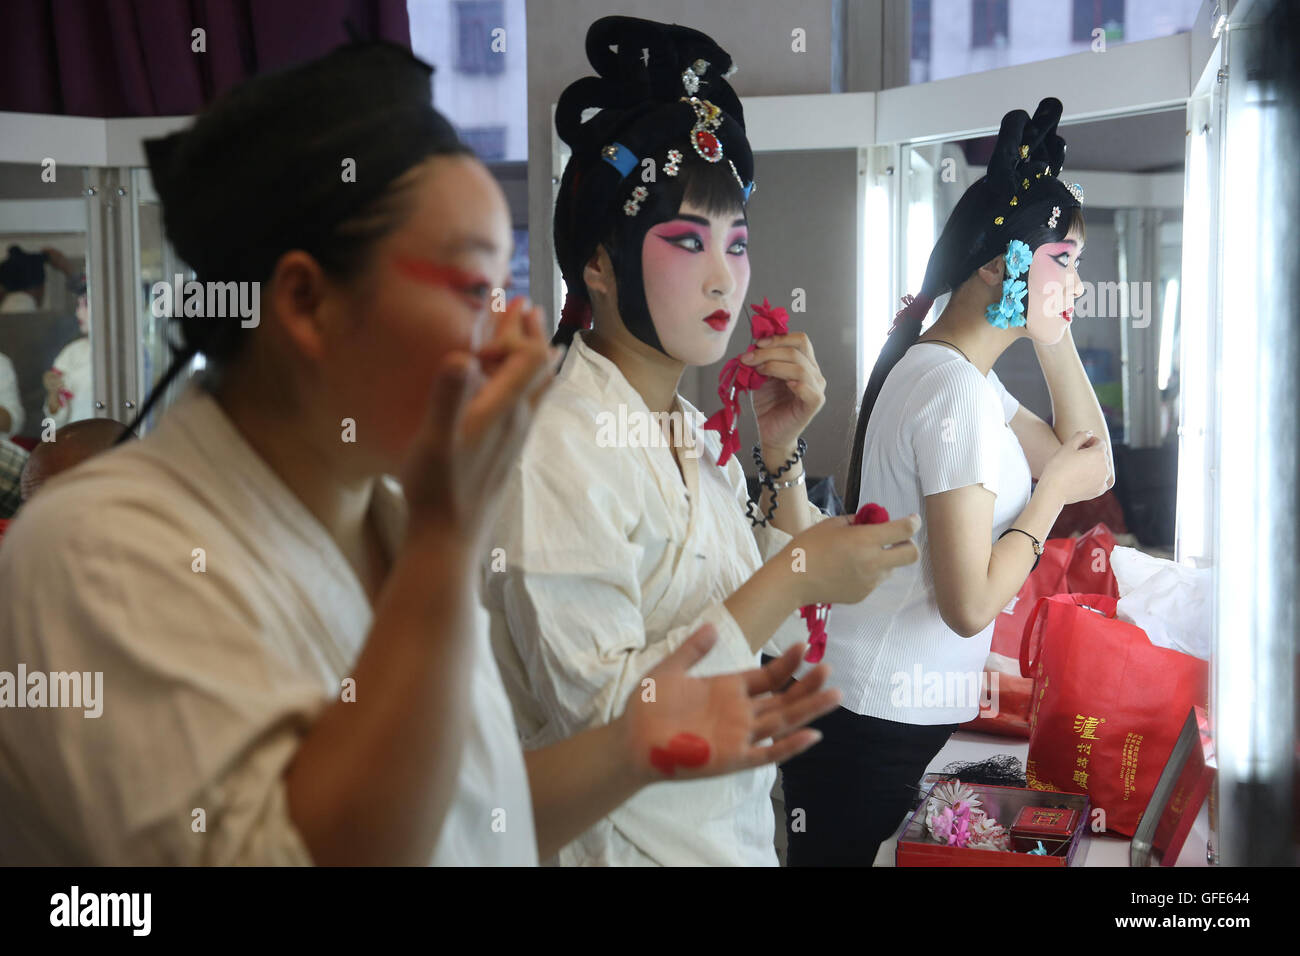 (160730) -- GU'AN, July 30, 2016 (Xinhua) -- Actresses of Hebei Bangzi apply make-up before a performance during 2016 China Hebei Bangzi Festival in Gu'an, north China's Hebei Province, July 29, 2016. Hebei Bangzi, or Hebei Opera, is the main type of opera in Hebei Province which became popular in Qing Dynasty (1644-1911). Like Peking Opera, it's a traditional Chinese opera which combines music, vocal performance, dance, acrobatics and etc. (Xinhua/Cai Yang)(wsw) (Photo by Xinhua/Sipa USA) Stock Photo